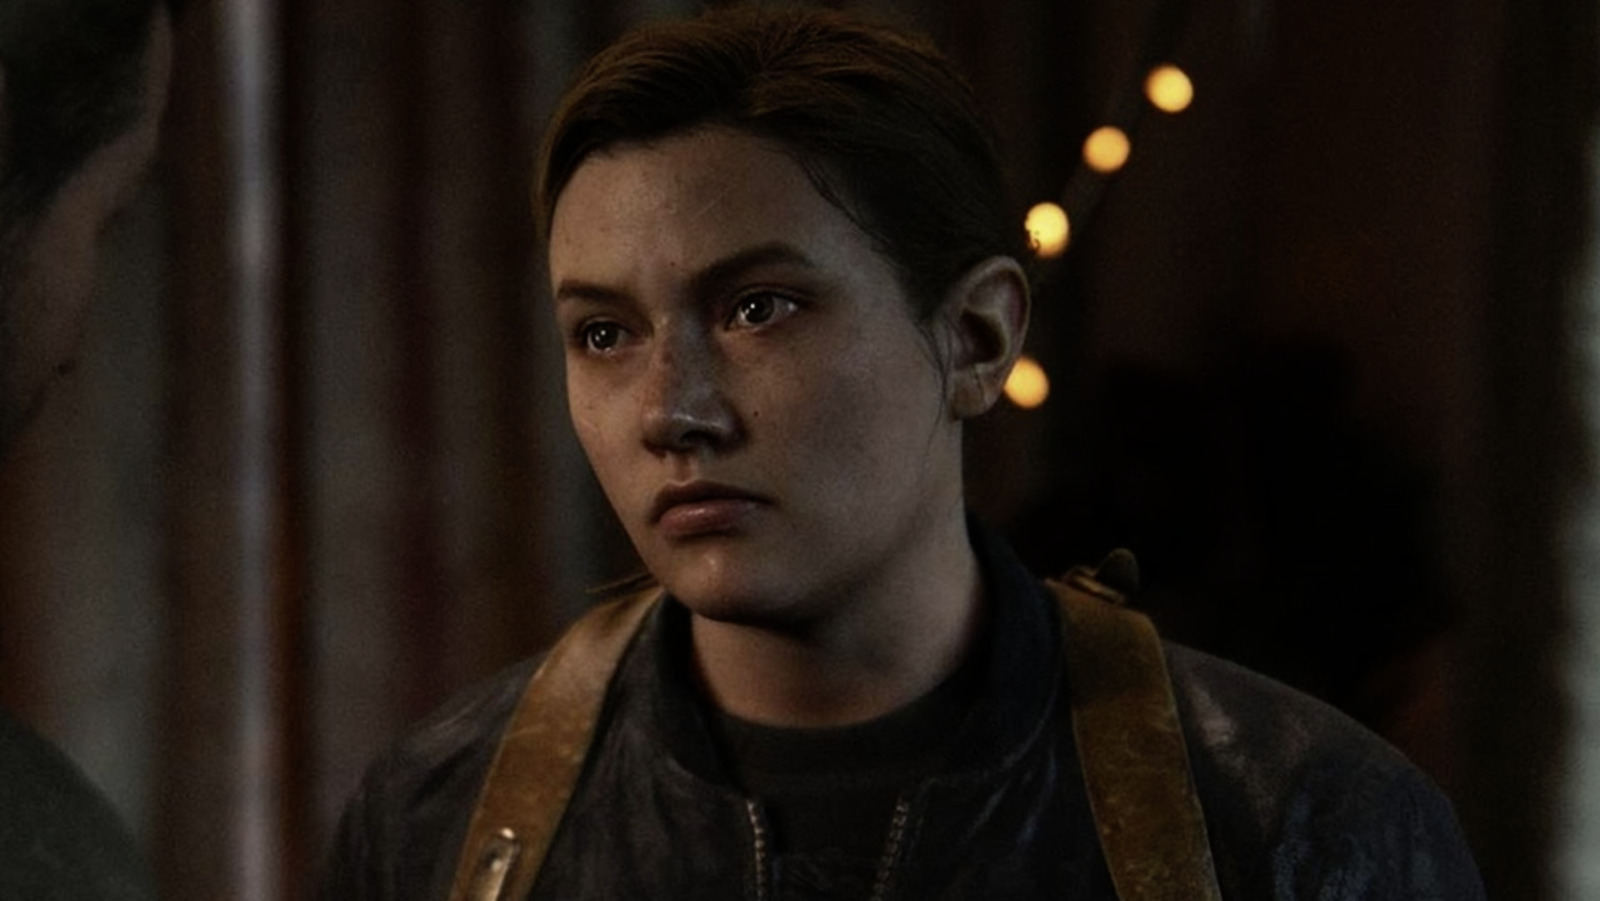 The Last of Us Season 2: How Old Would Abby Be? (If She Makes an Appearance)